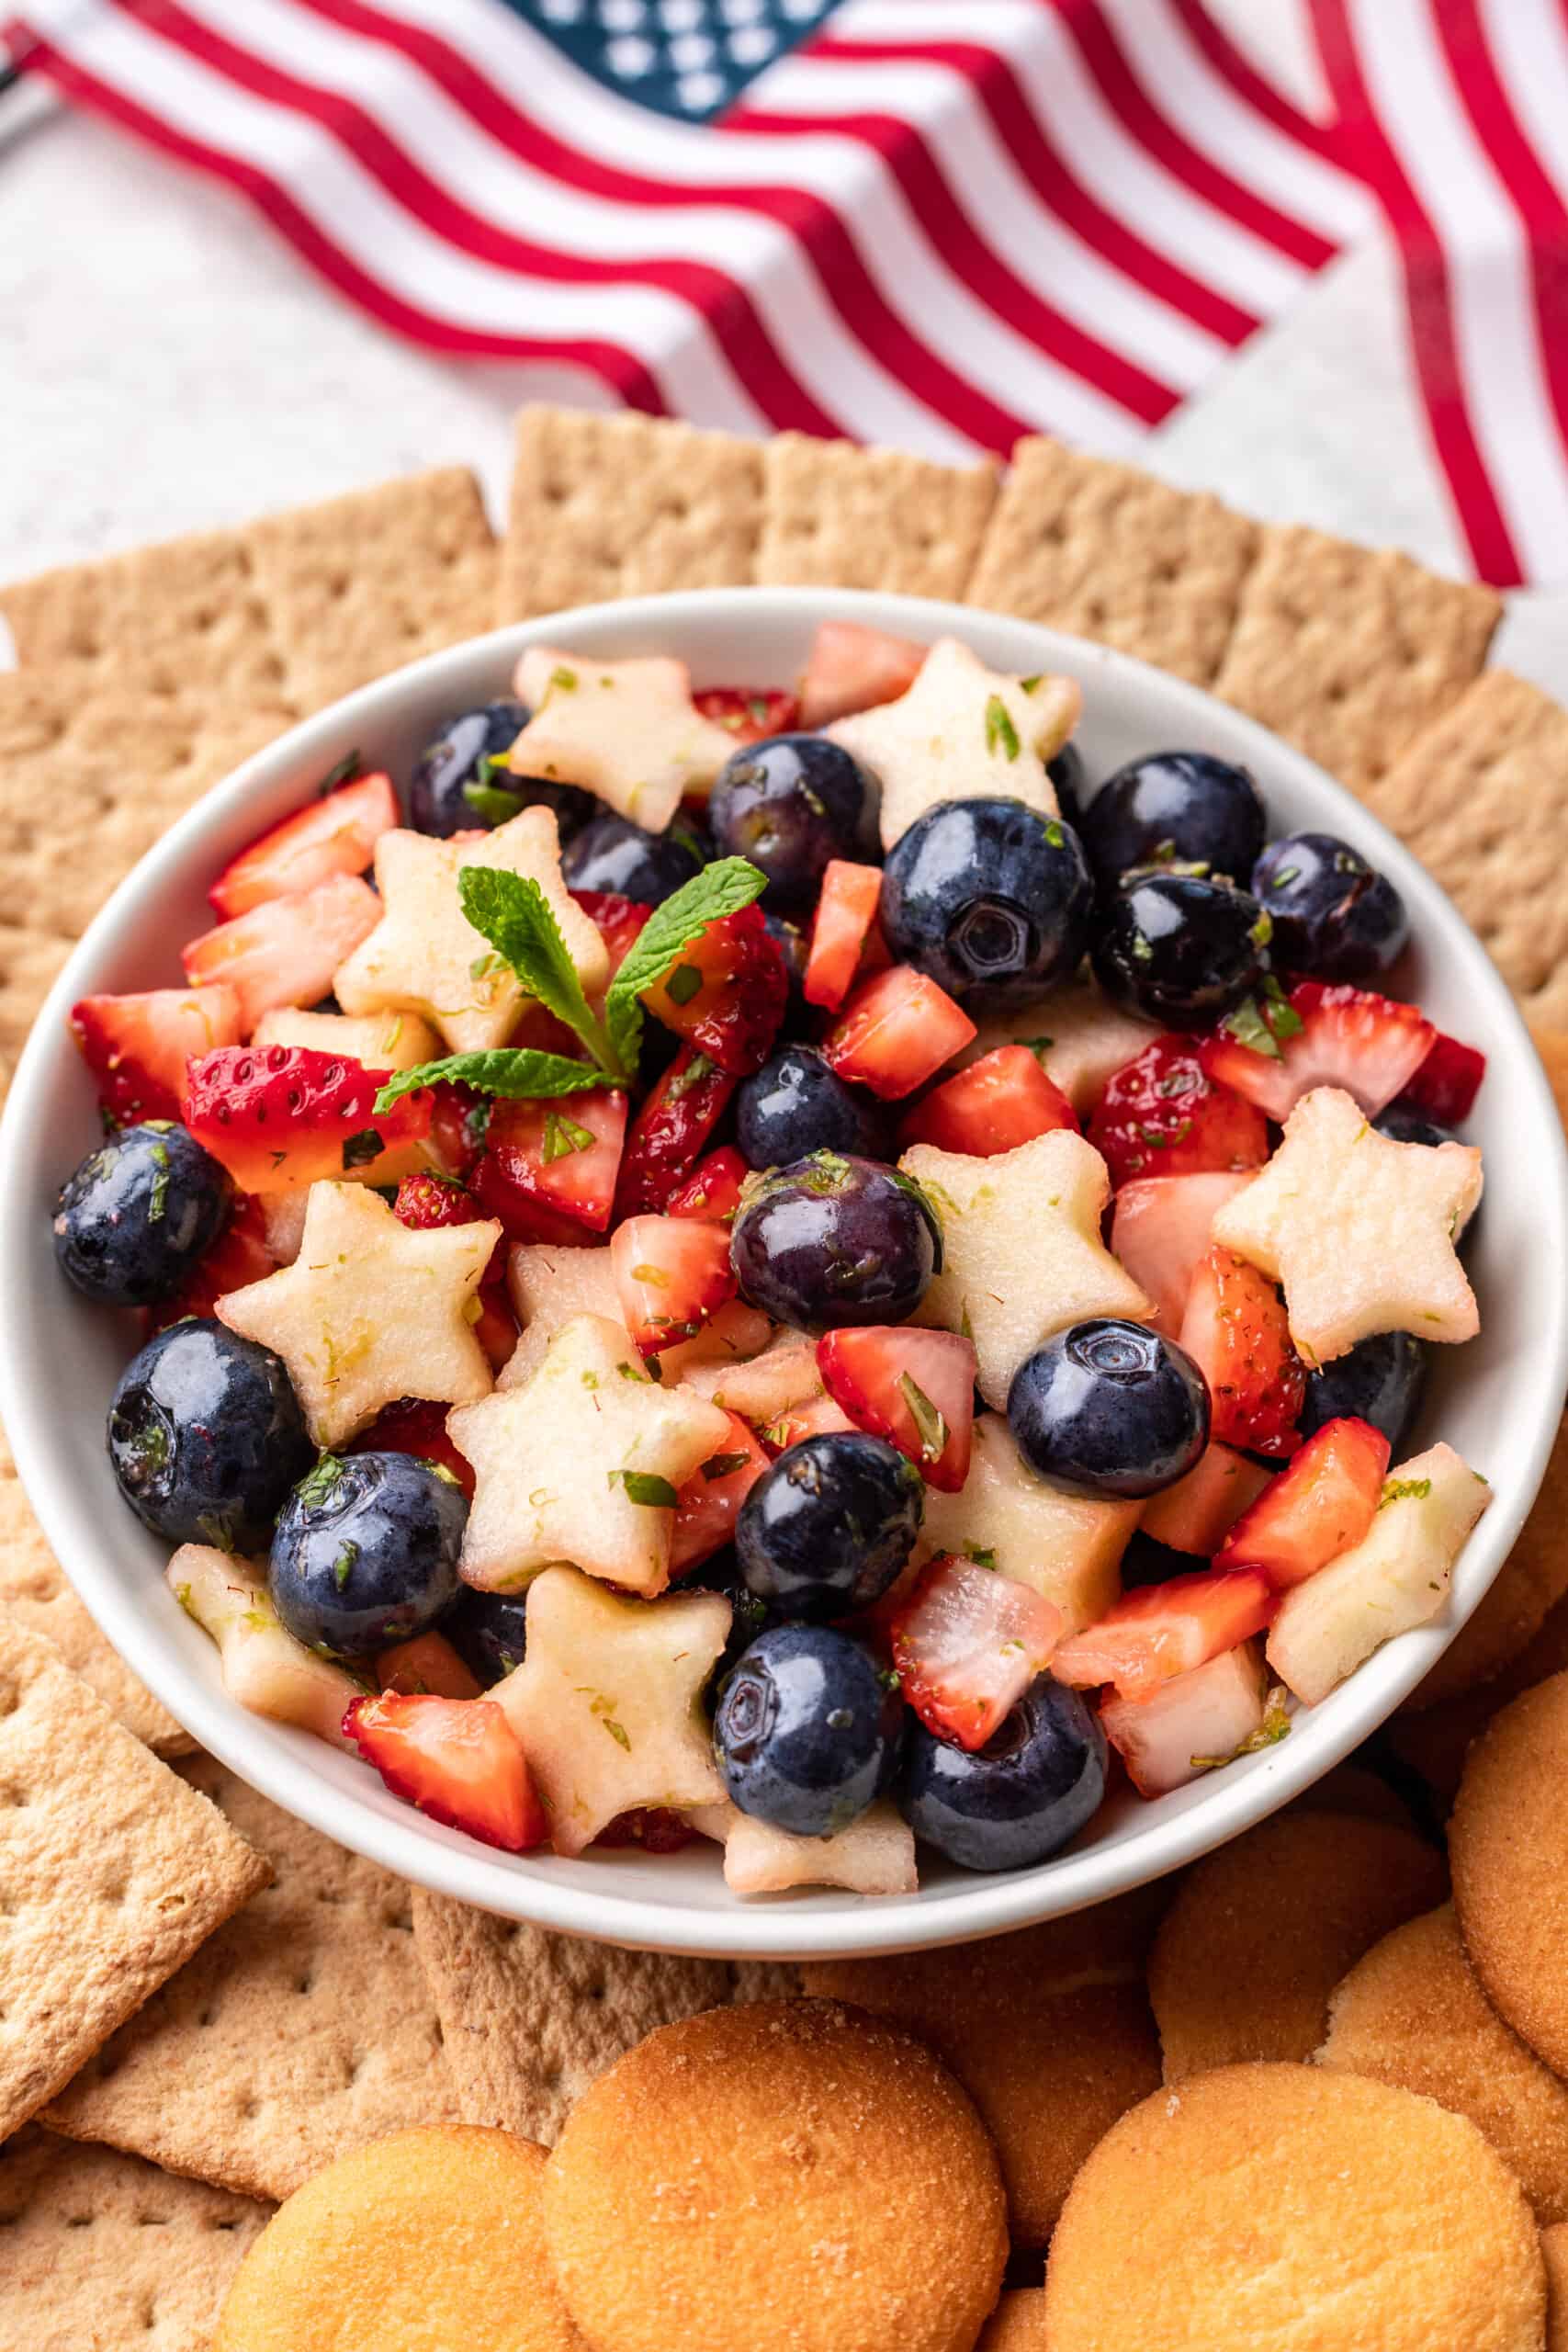 Red, white, and blue fruit salsa in a white bowl with American flags behind it.